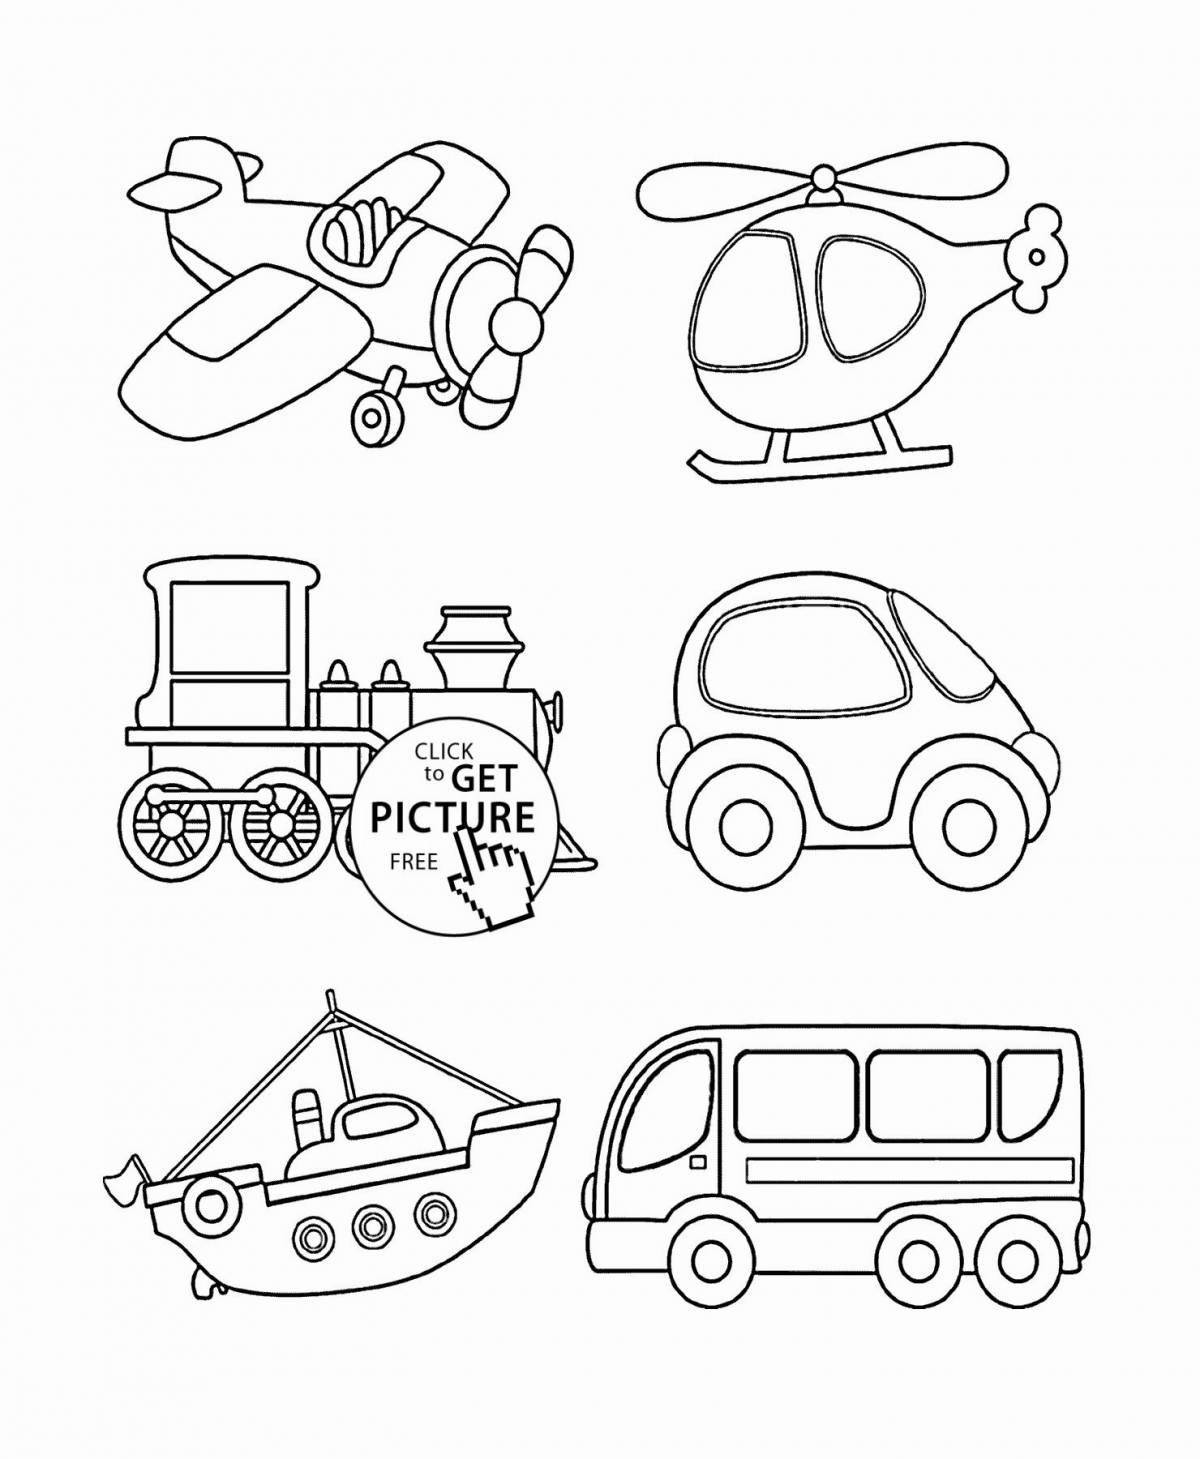 Shining Transport coloring page